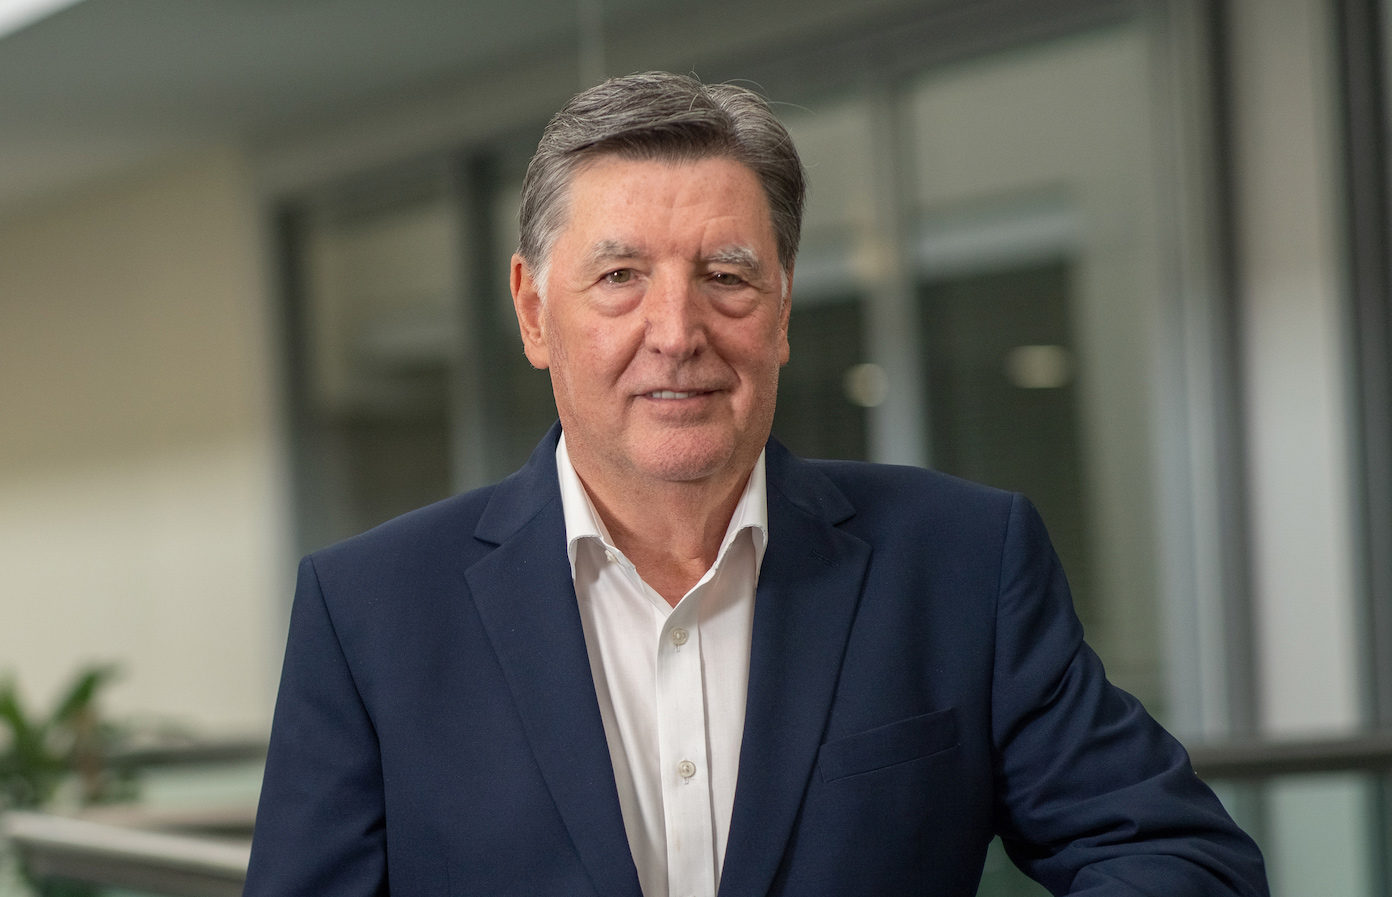 Hili Ventures appoints Archie Bethel CBE as its new Chairperson